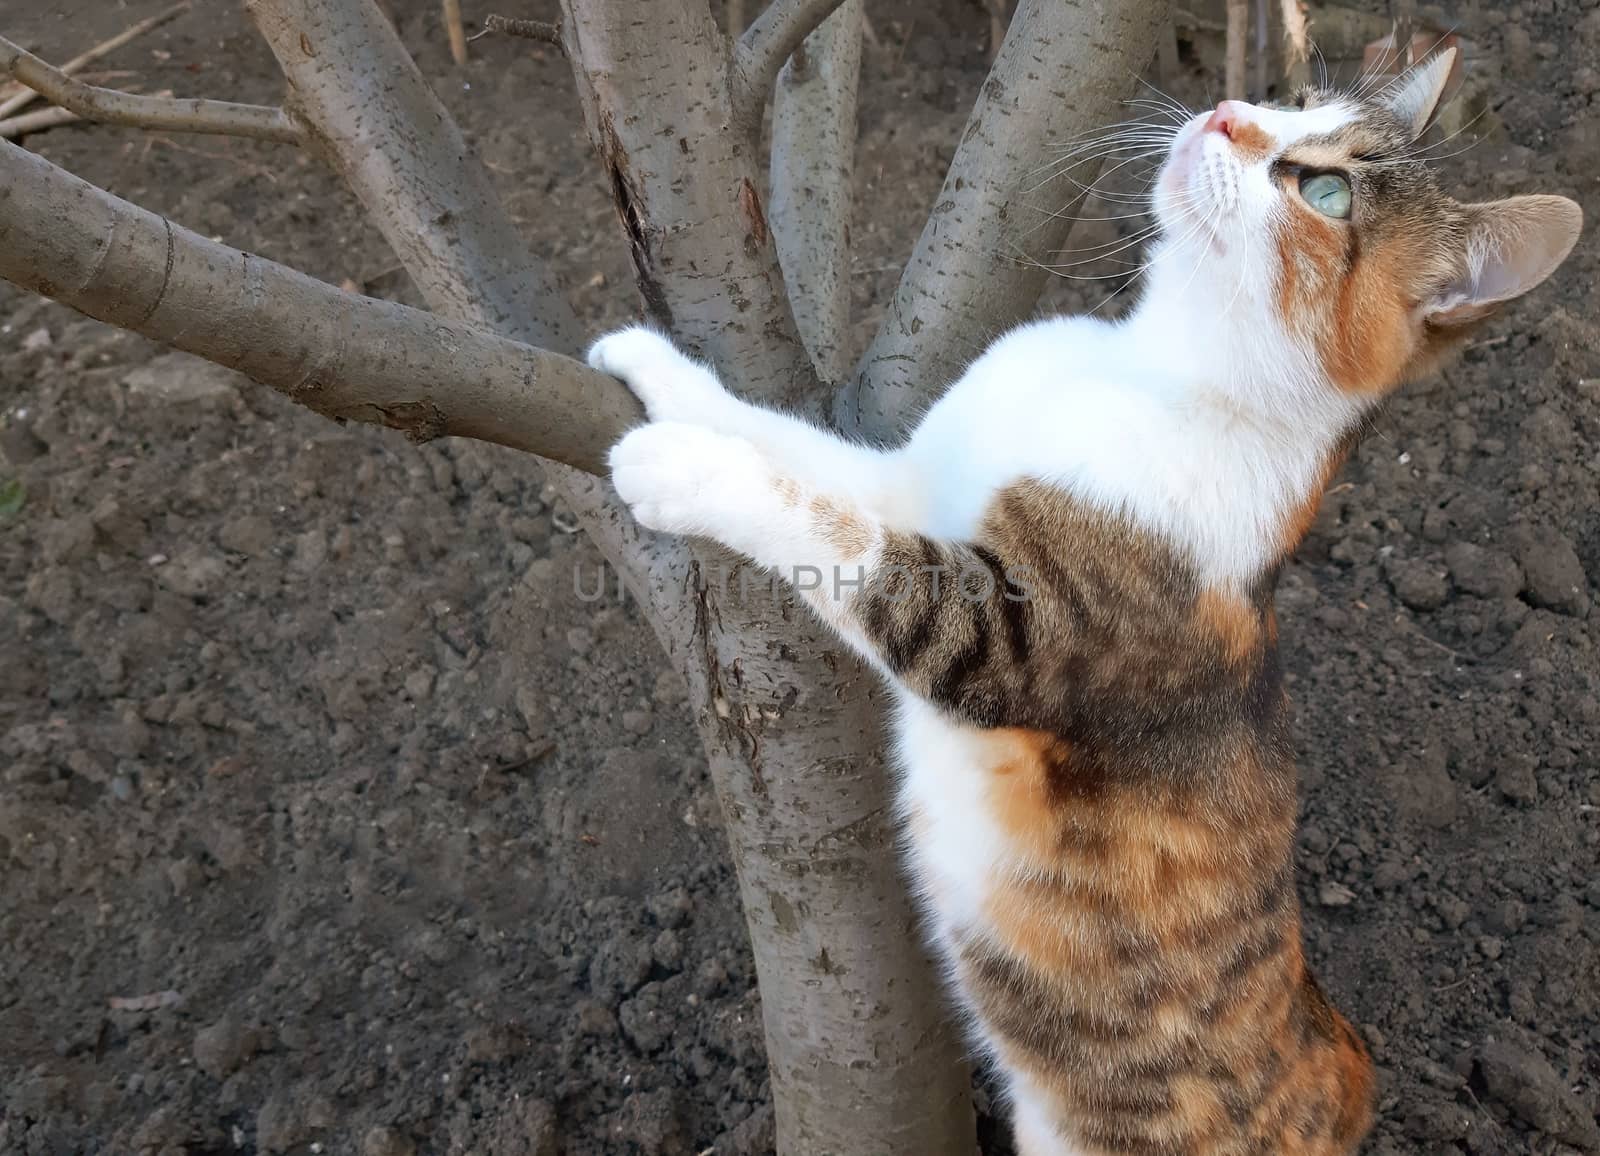 A beautiful cat climbs on a tree and looks curiously by Mindru